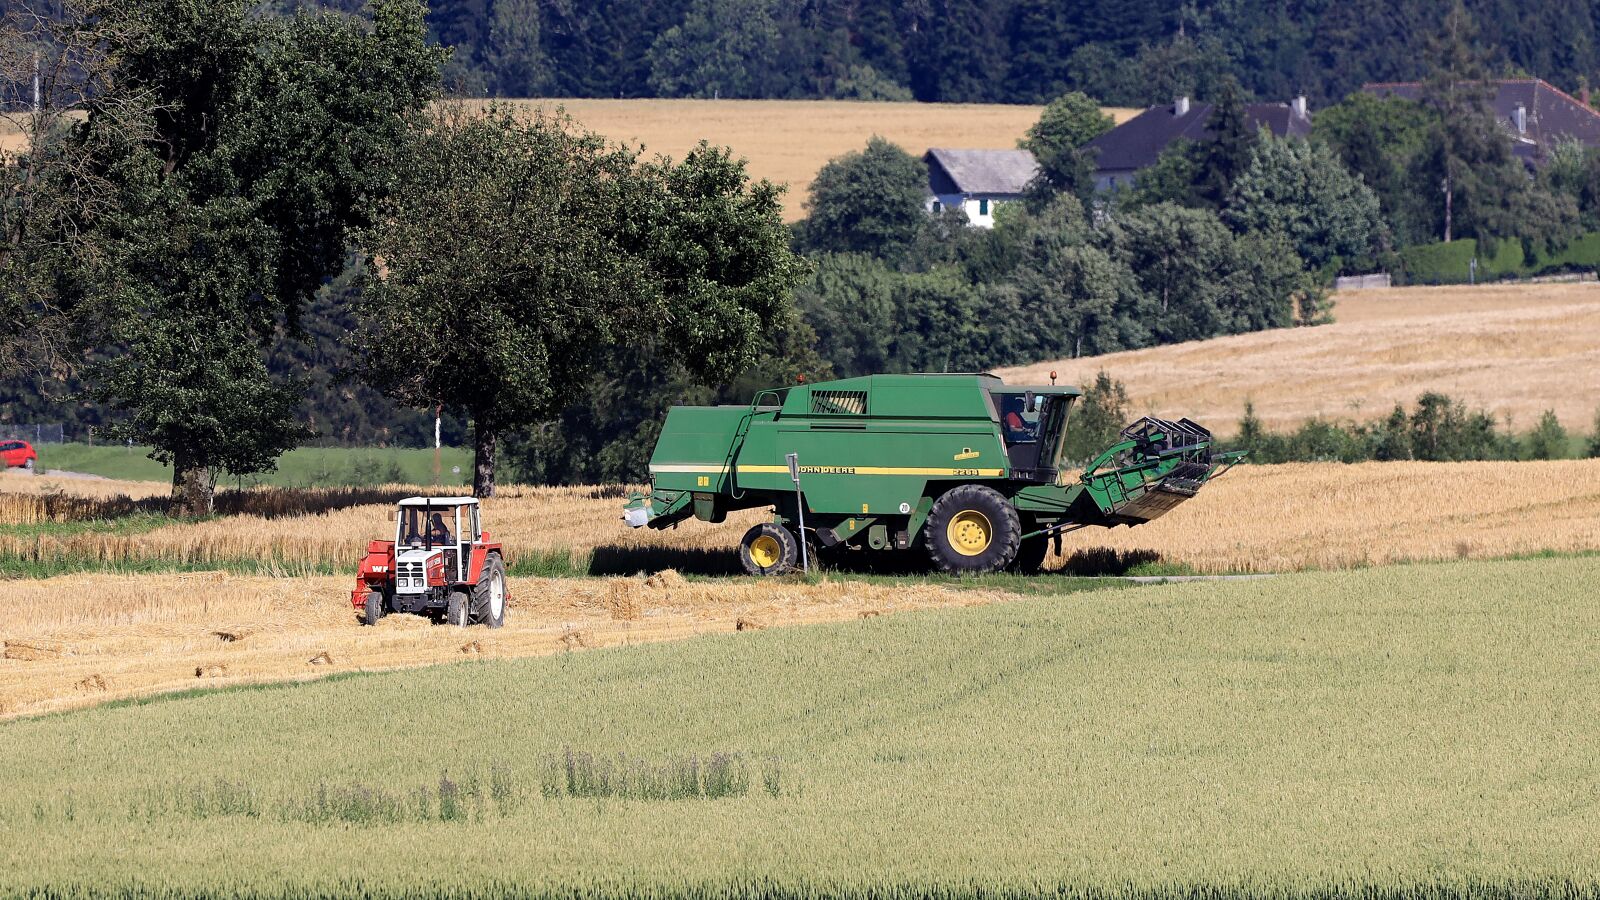 150-600mm F5-6.3 DG OS HSM | Contemporary 015 sample photo. Harvest, tractor, combine harvester photography